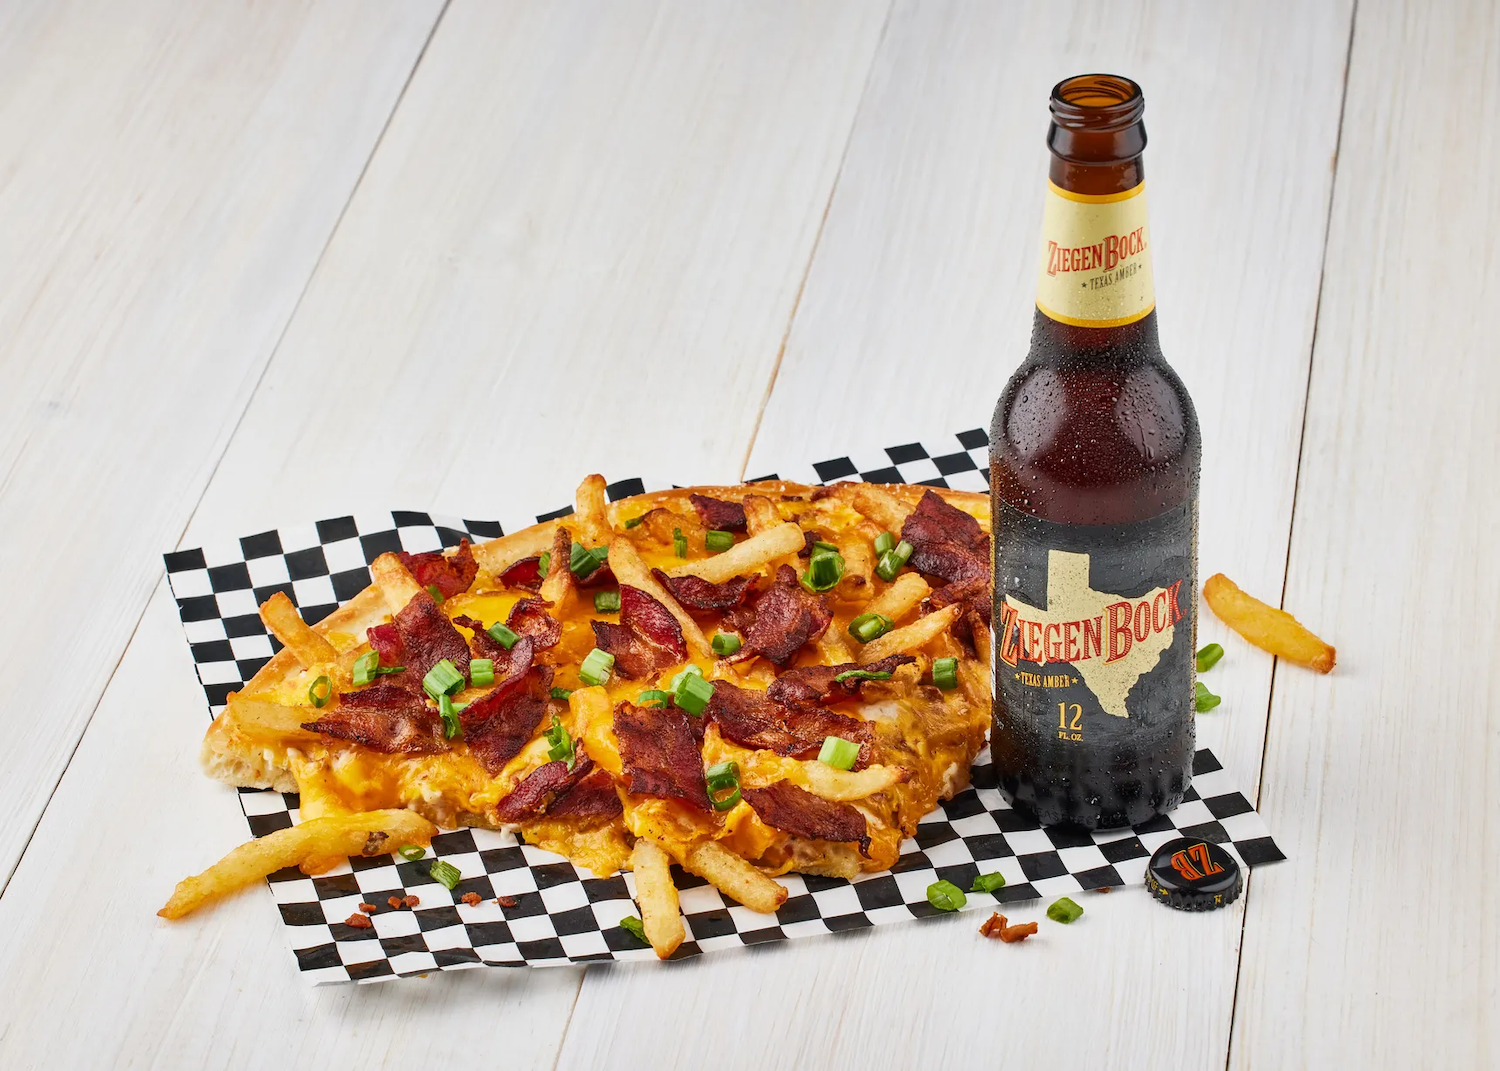 Loaded fries pizza next to beer bottle